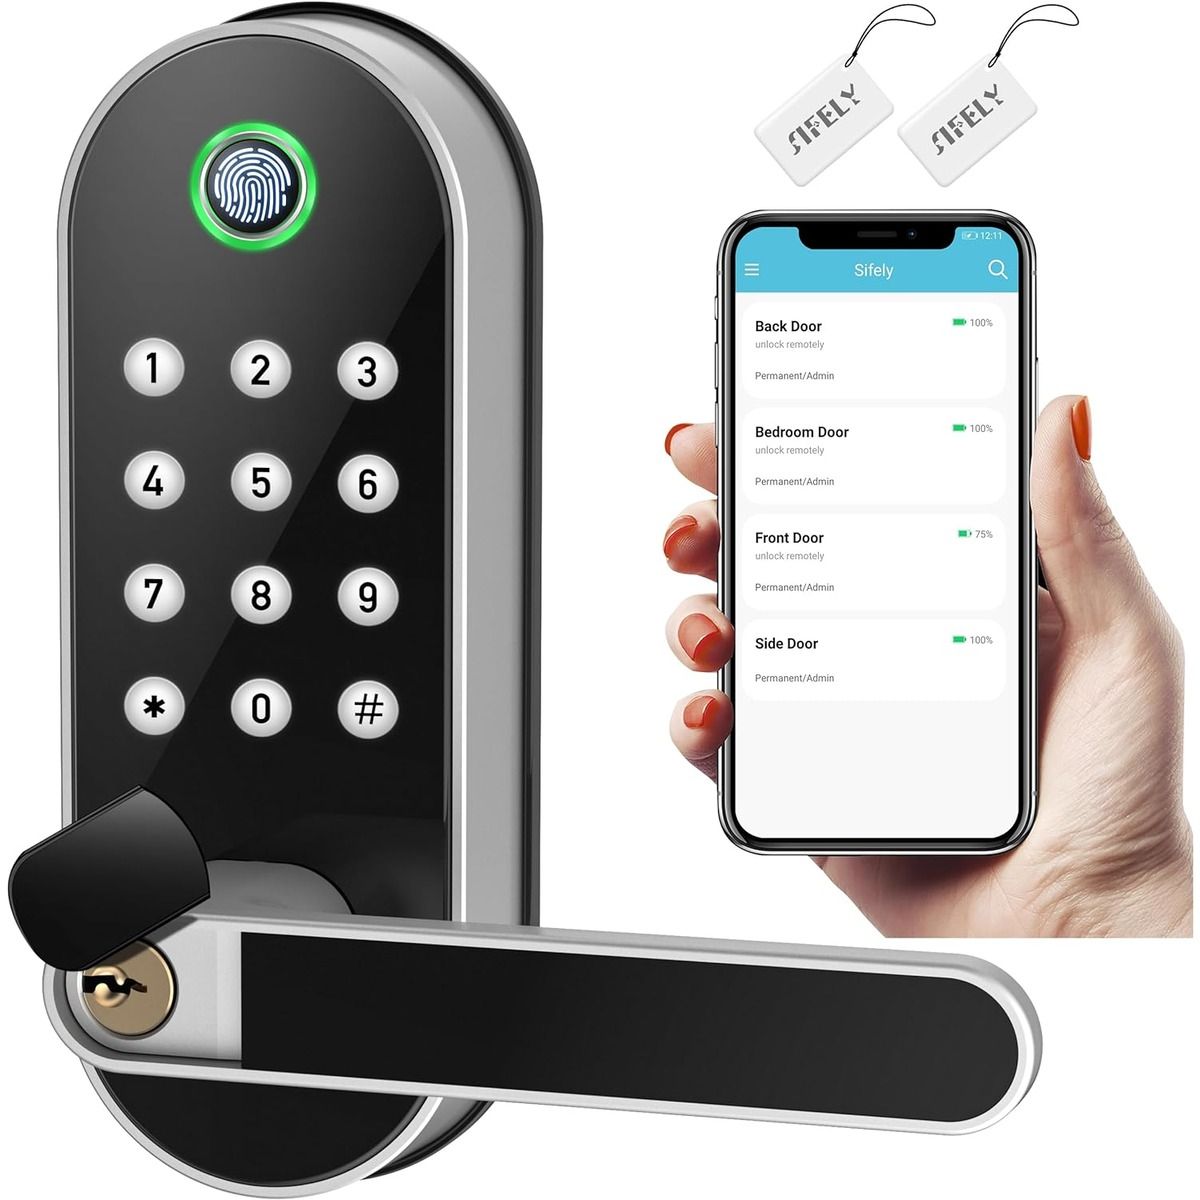 The Sifely Smart Lock and a smartphone against a white background